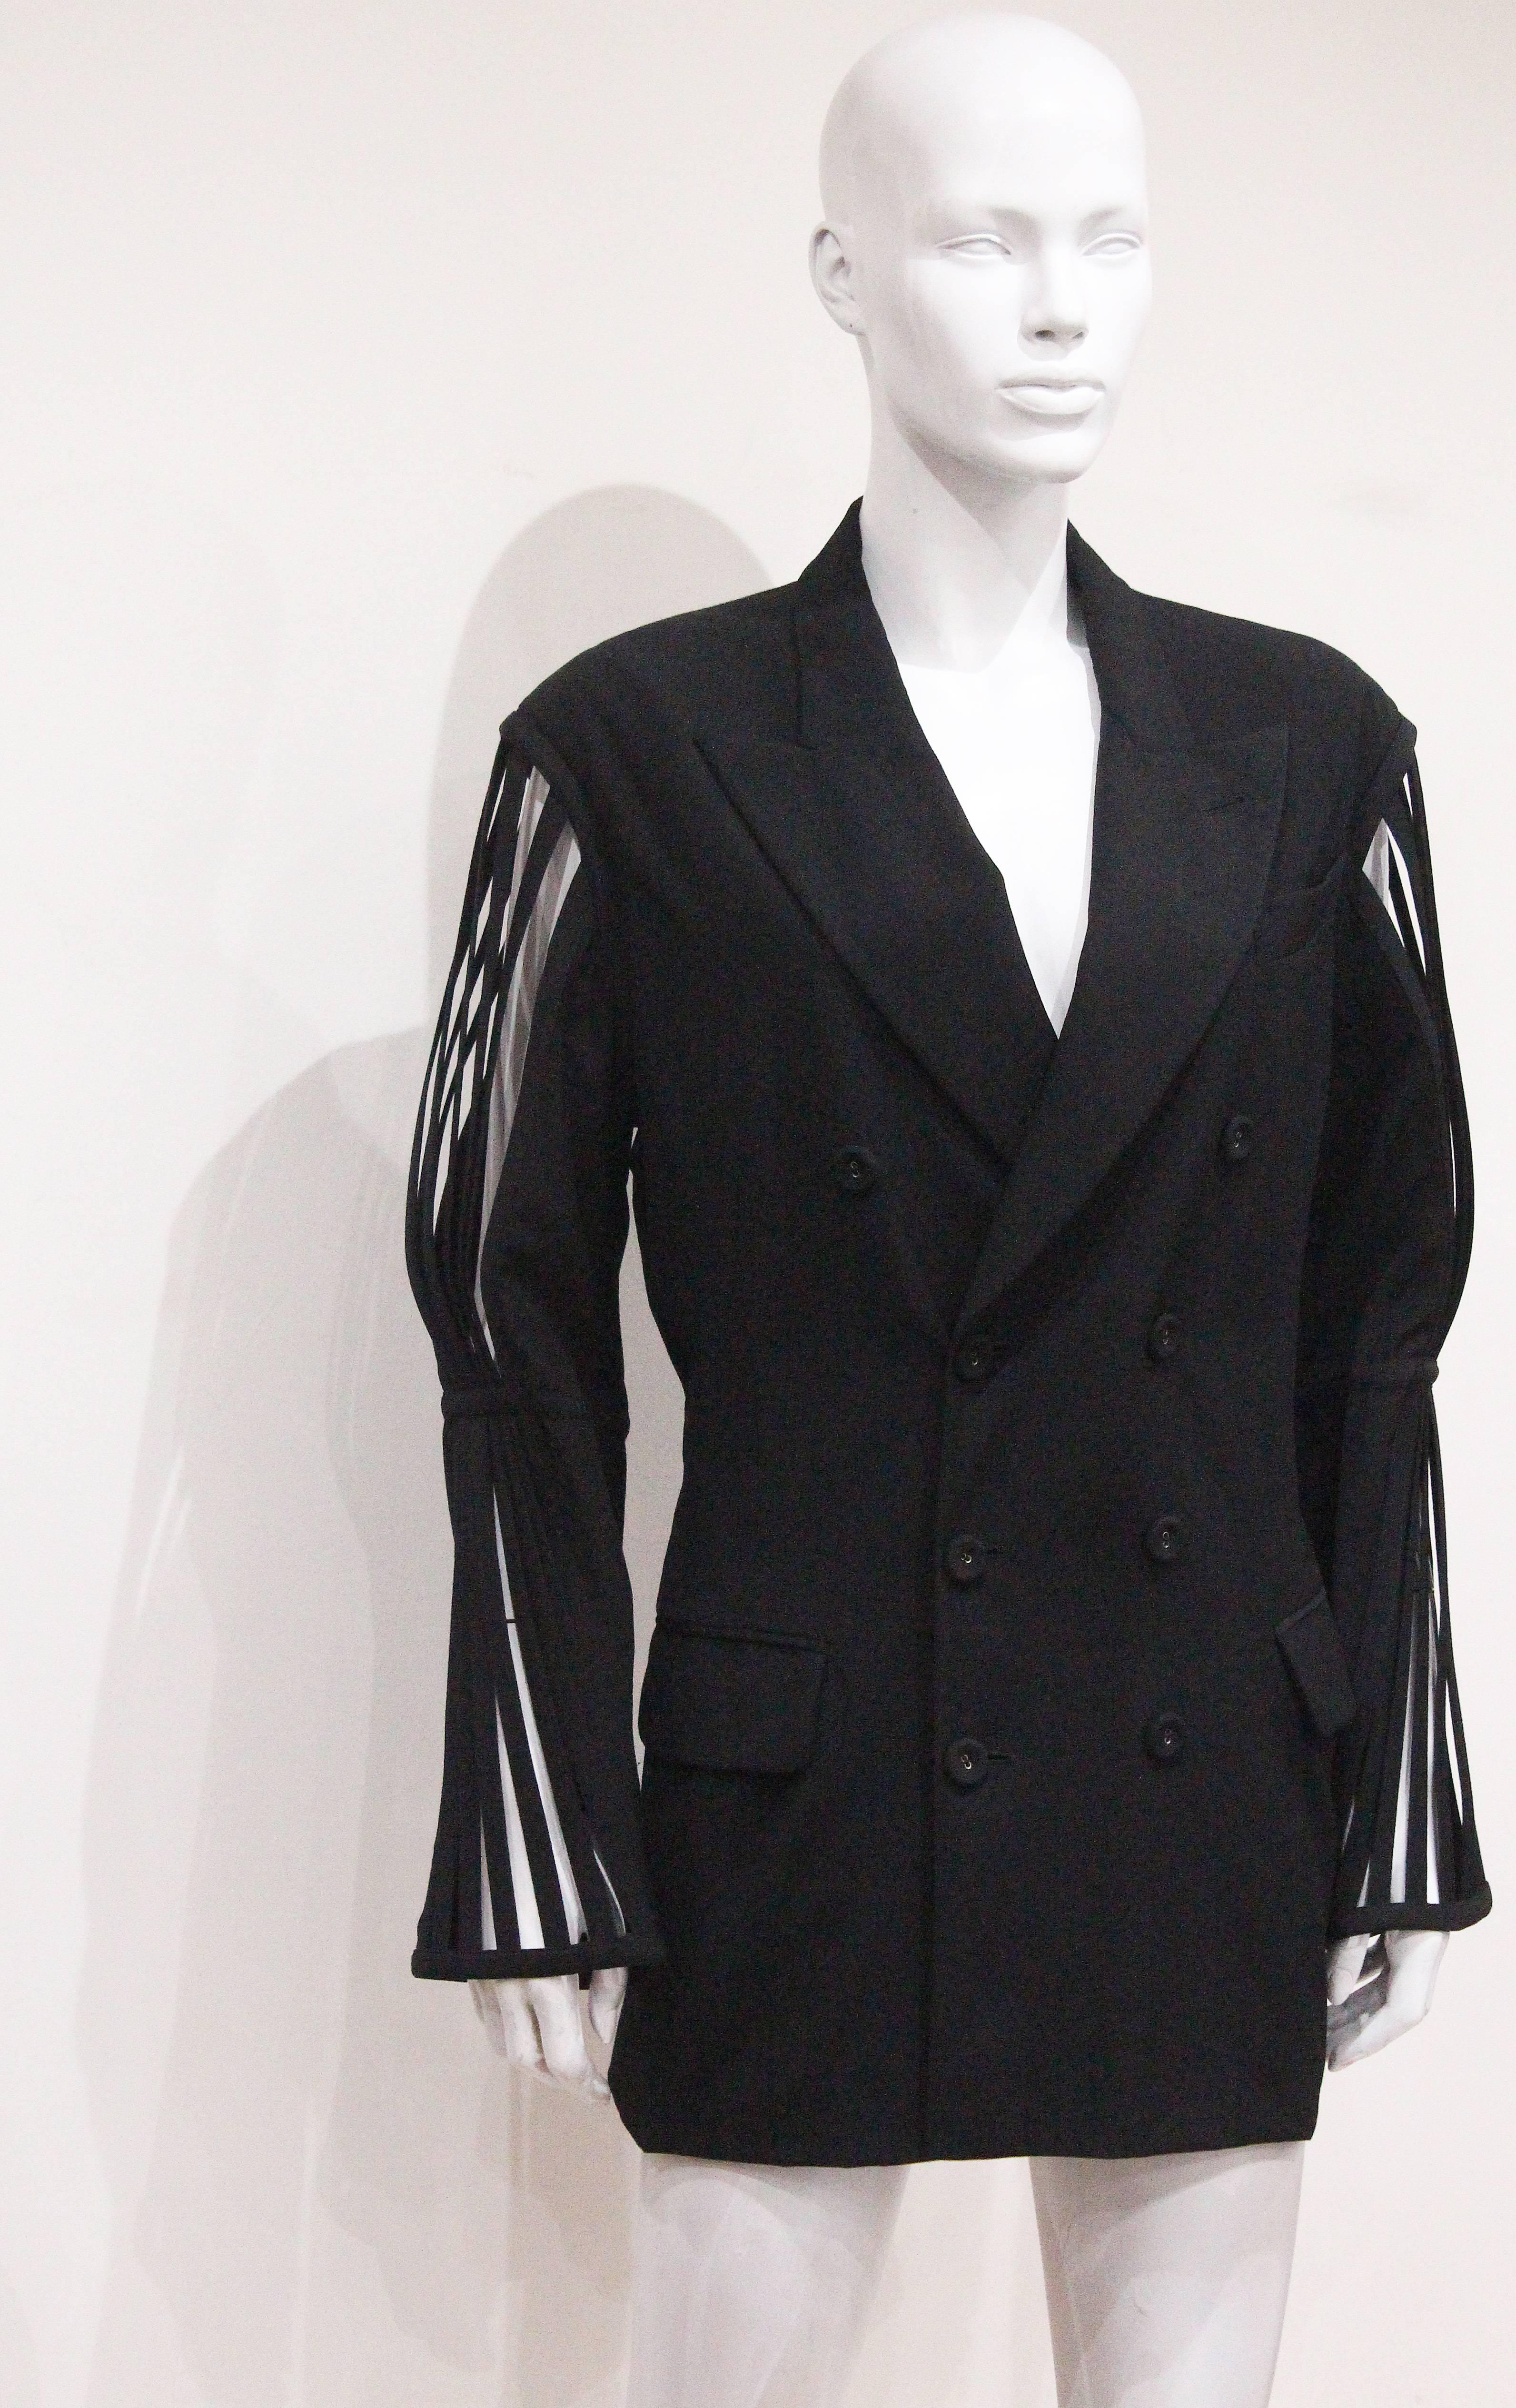 Black Jean Paul Gaultier double breasted blazer jacket with caged sleeves, c. 1989